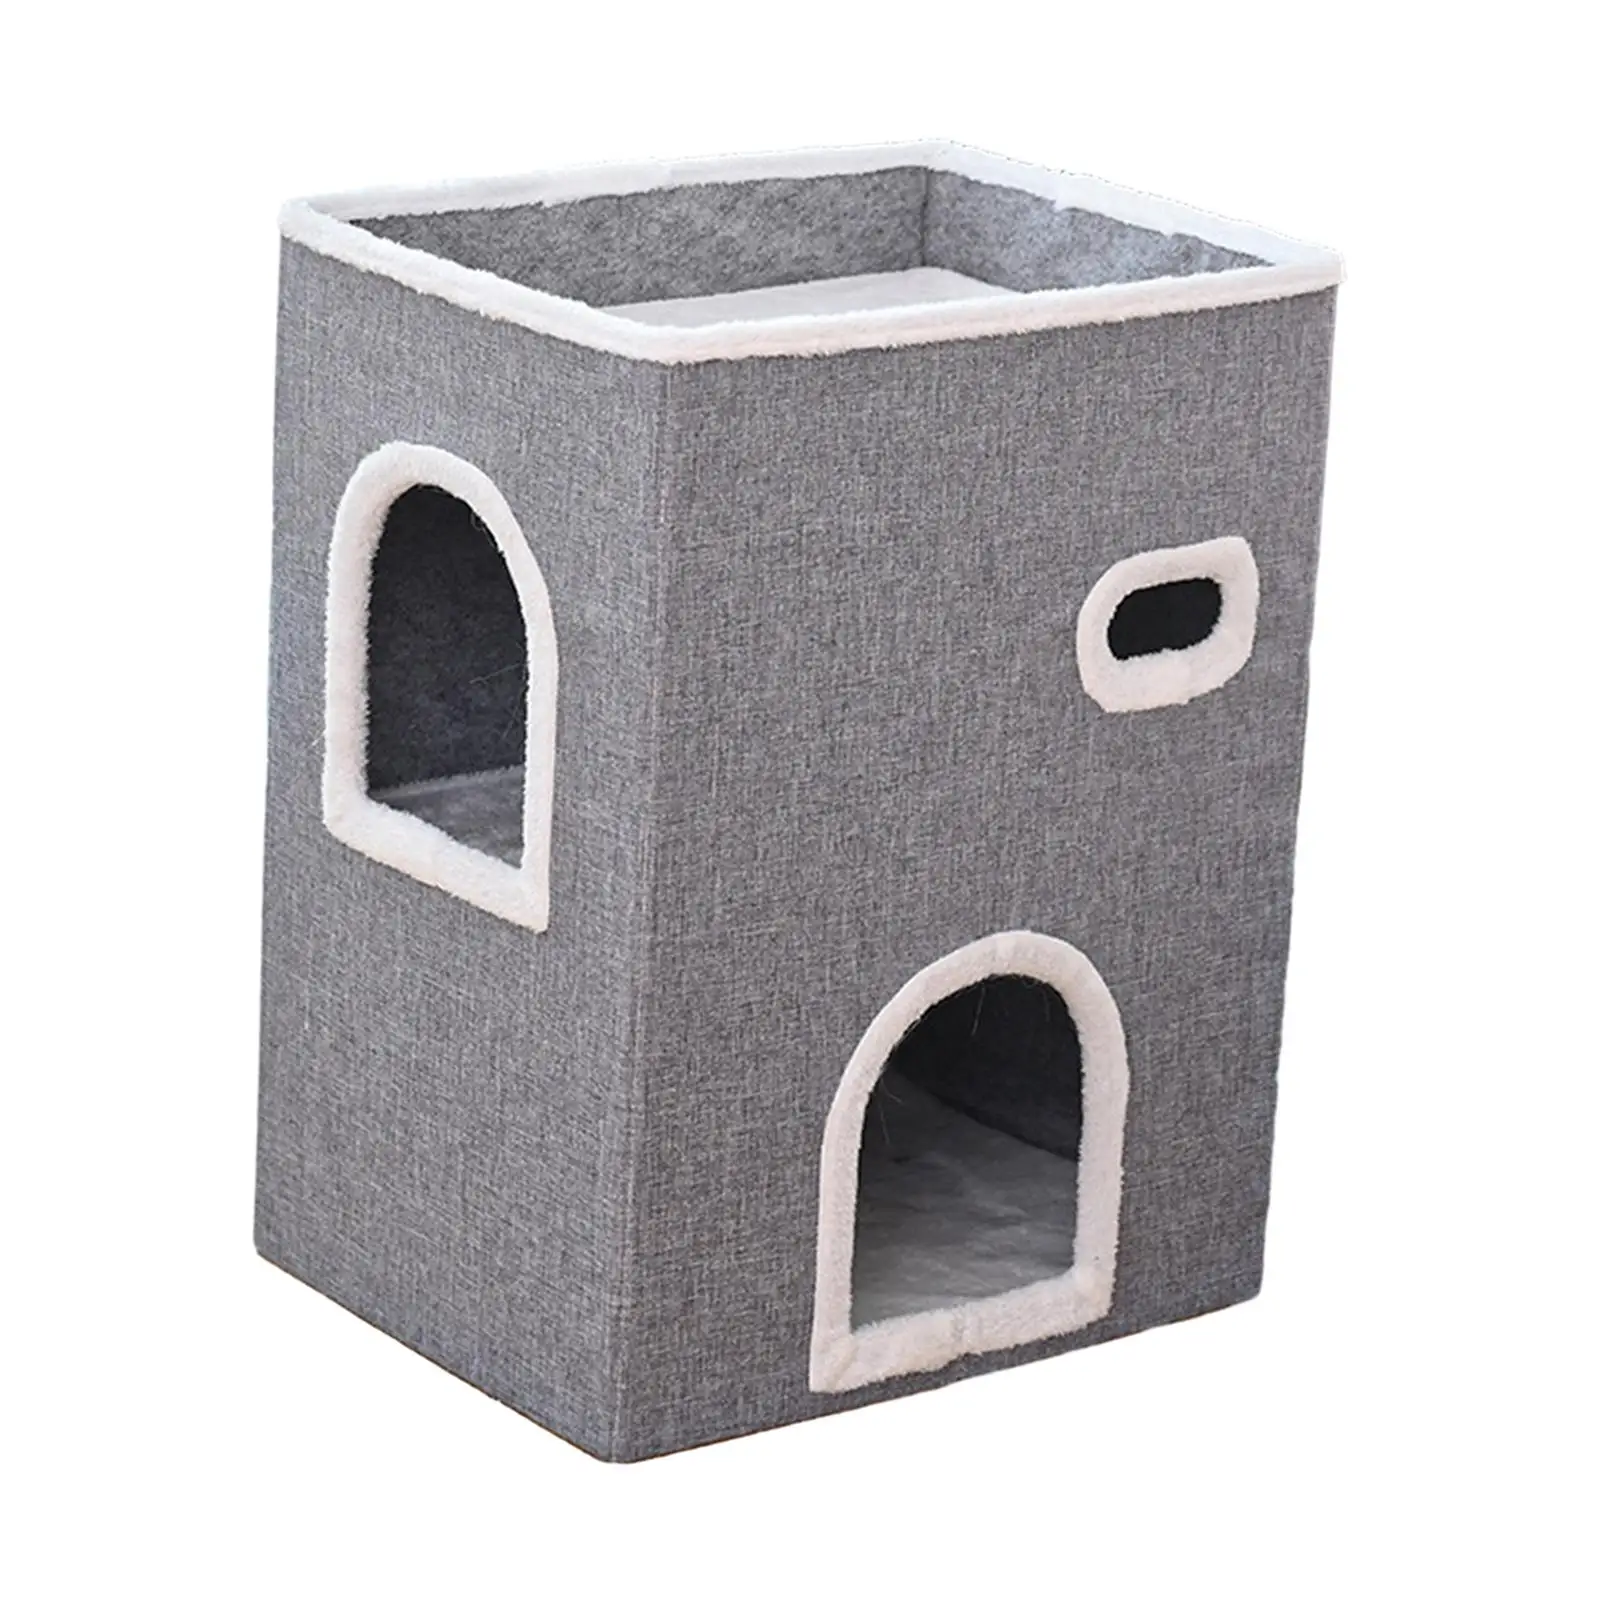 Foldable Cat Bed Condo Nest with Scratch Pad for Pet Supplies Playing Climb